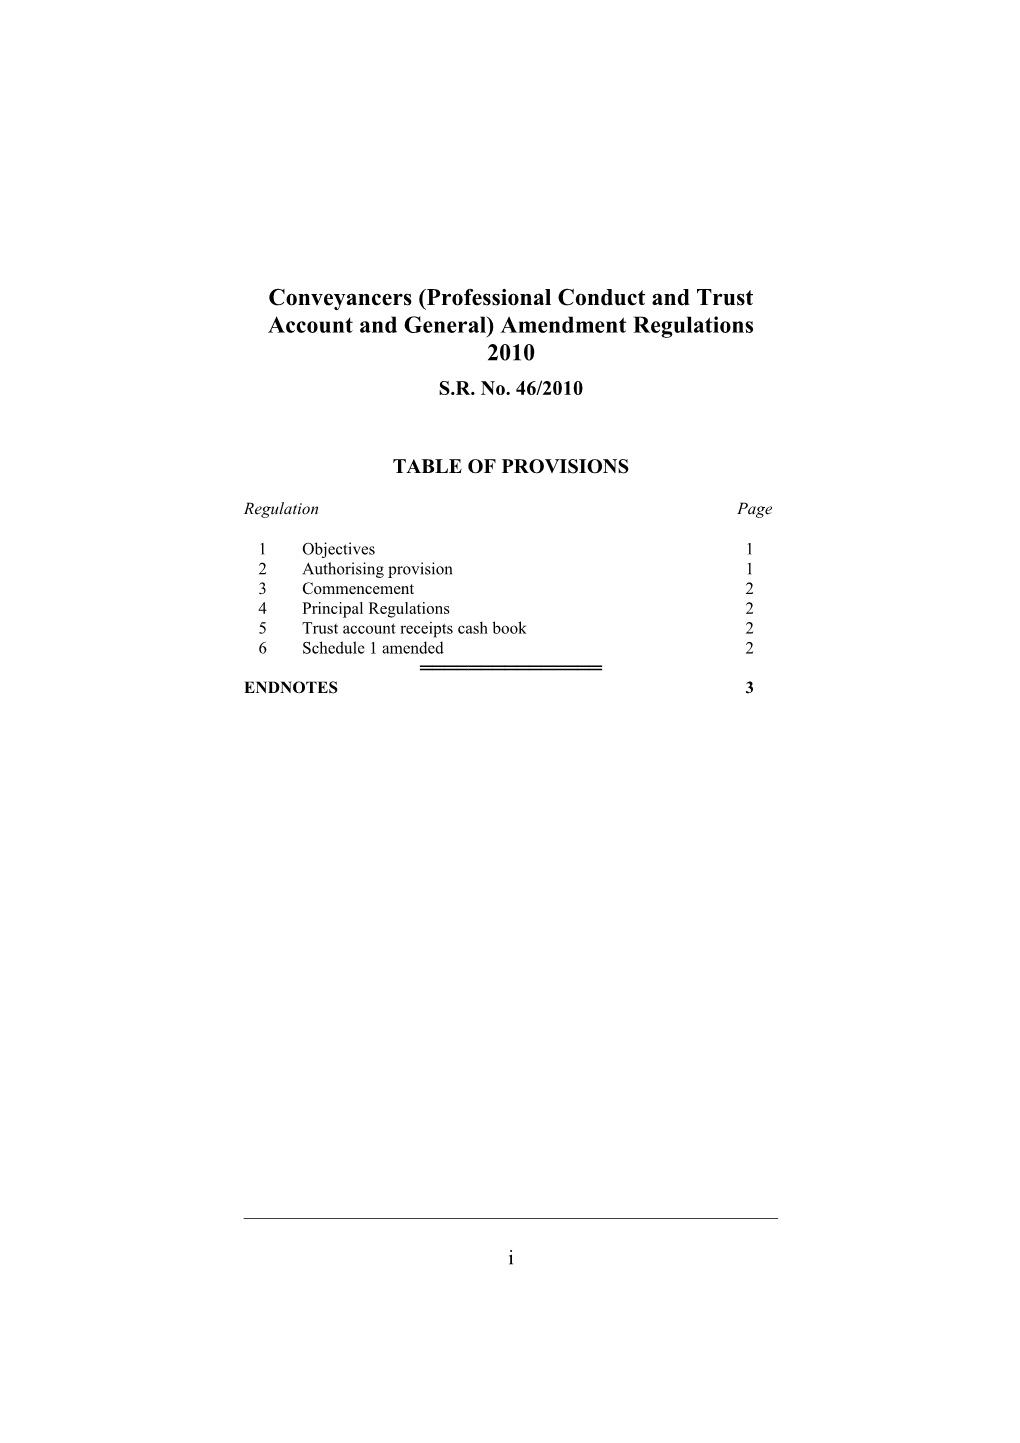 Conveyancers (Professional Conduct and Trust Account and General) Amendment Regulations 2010